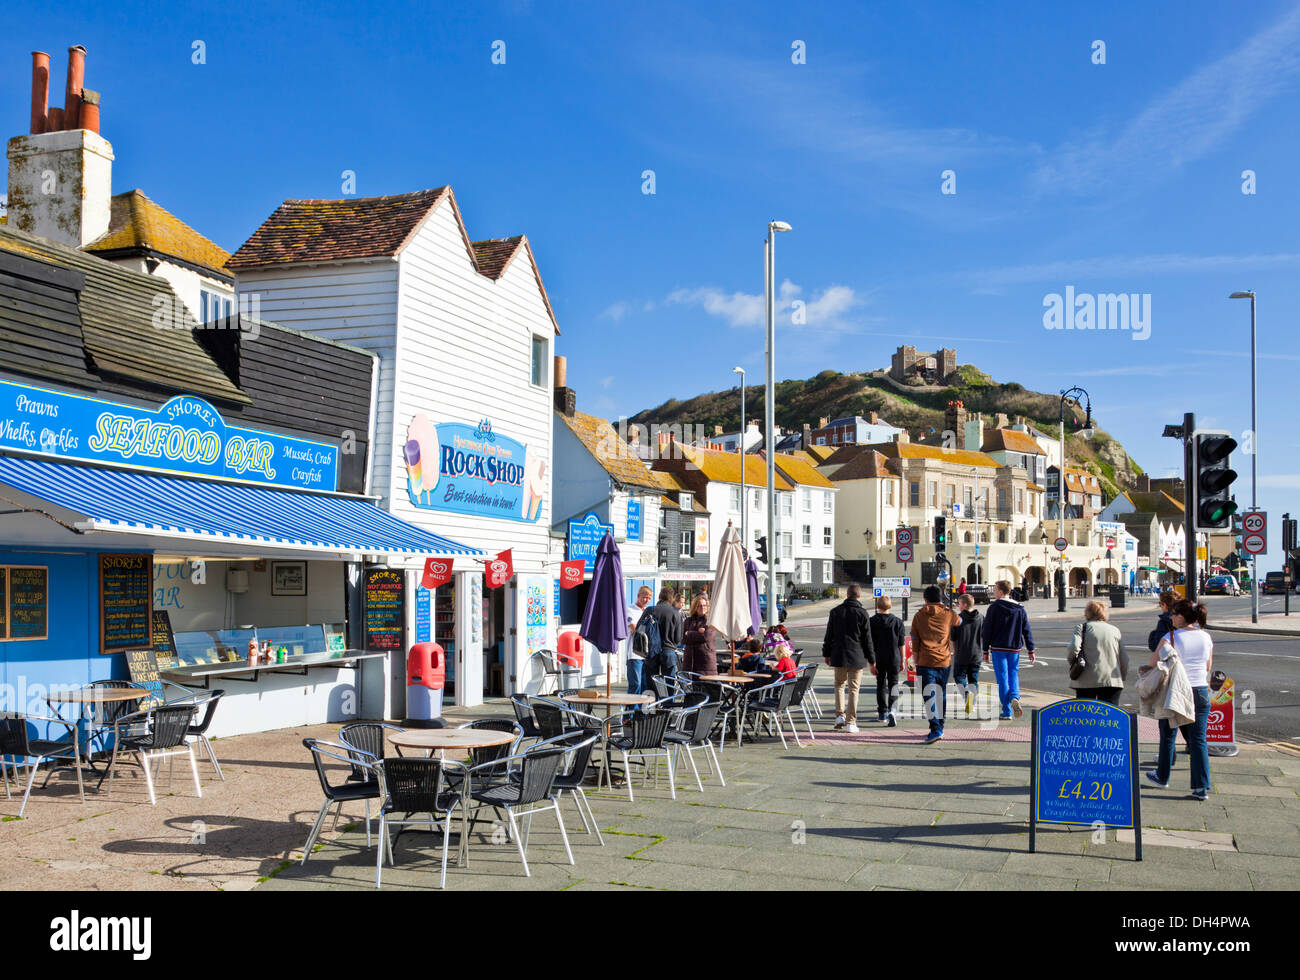 Seafood bar Shop Café in Hastings alte Stadt East Sussex England UK GB EU Europa Stockfoto